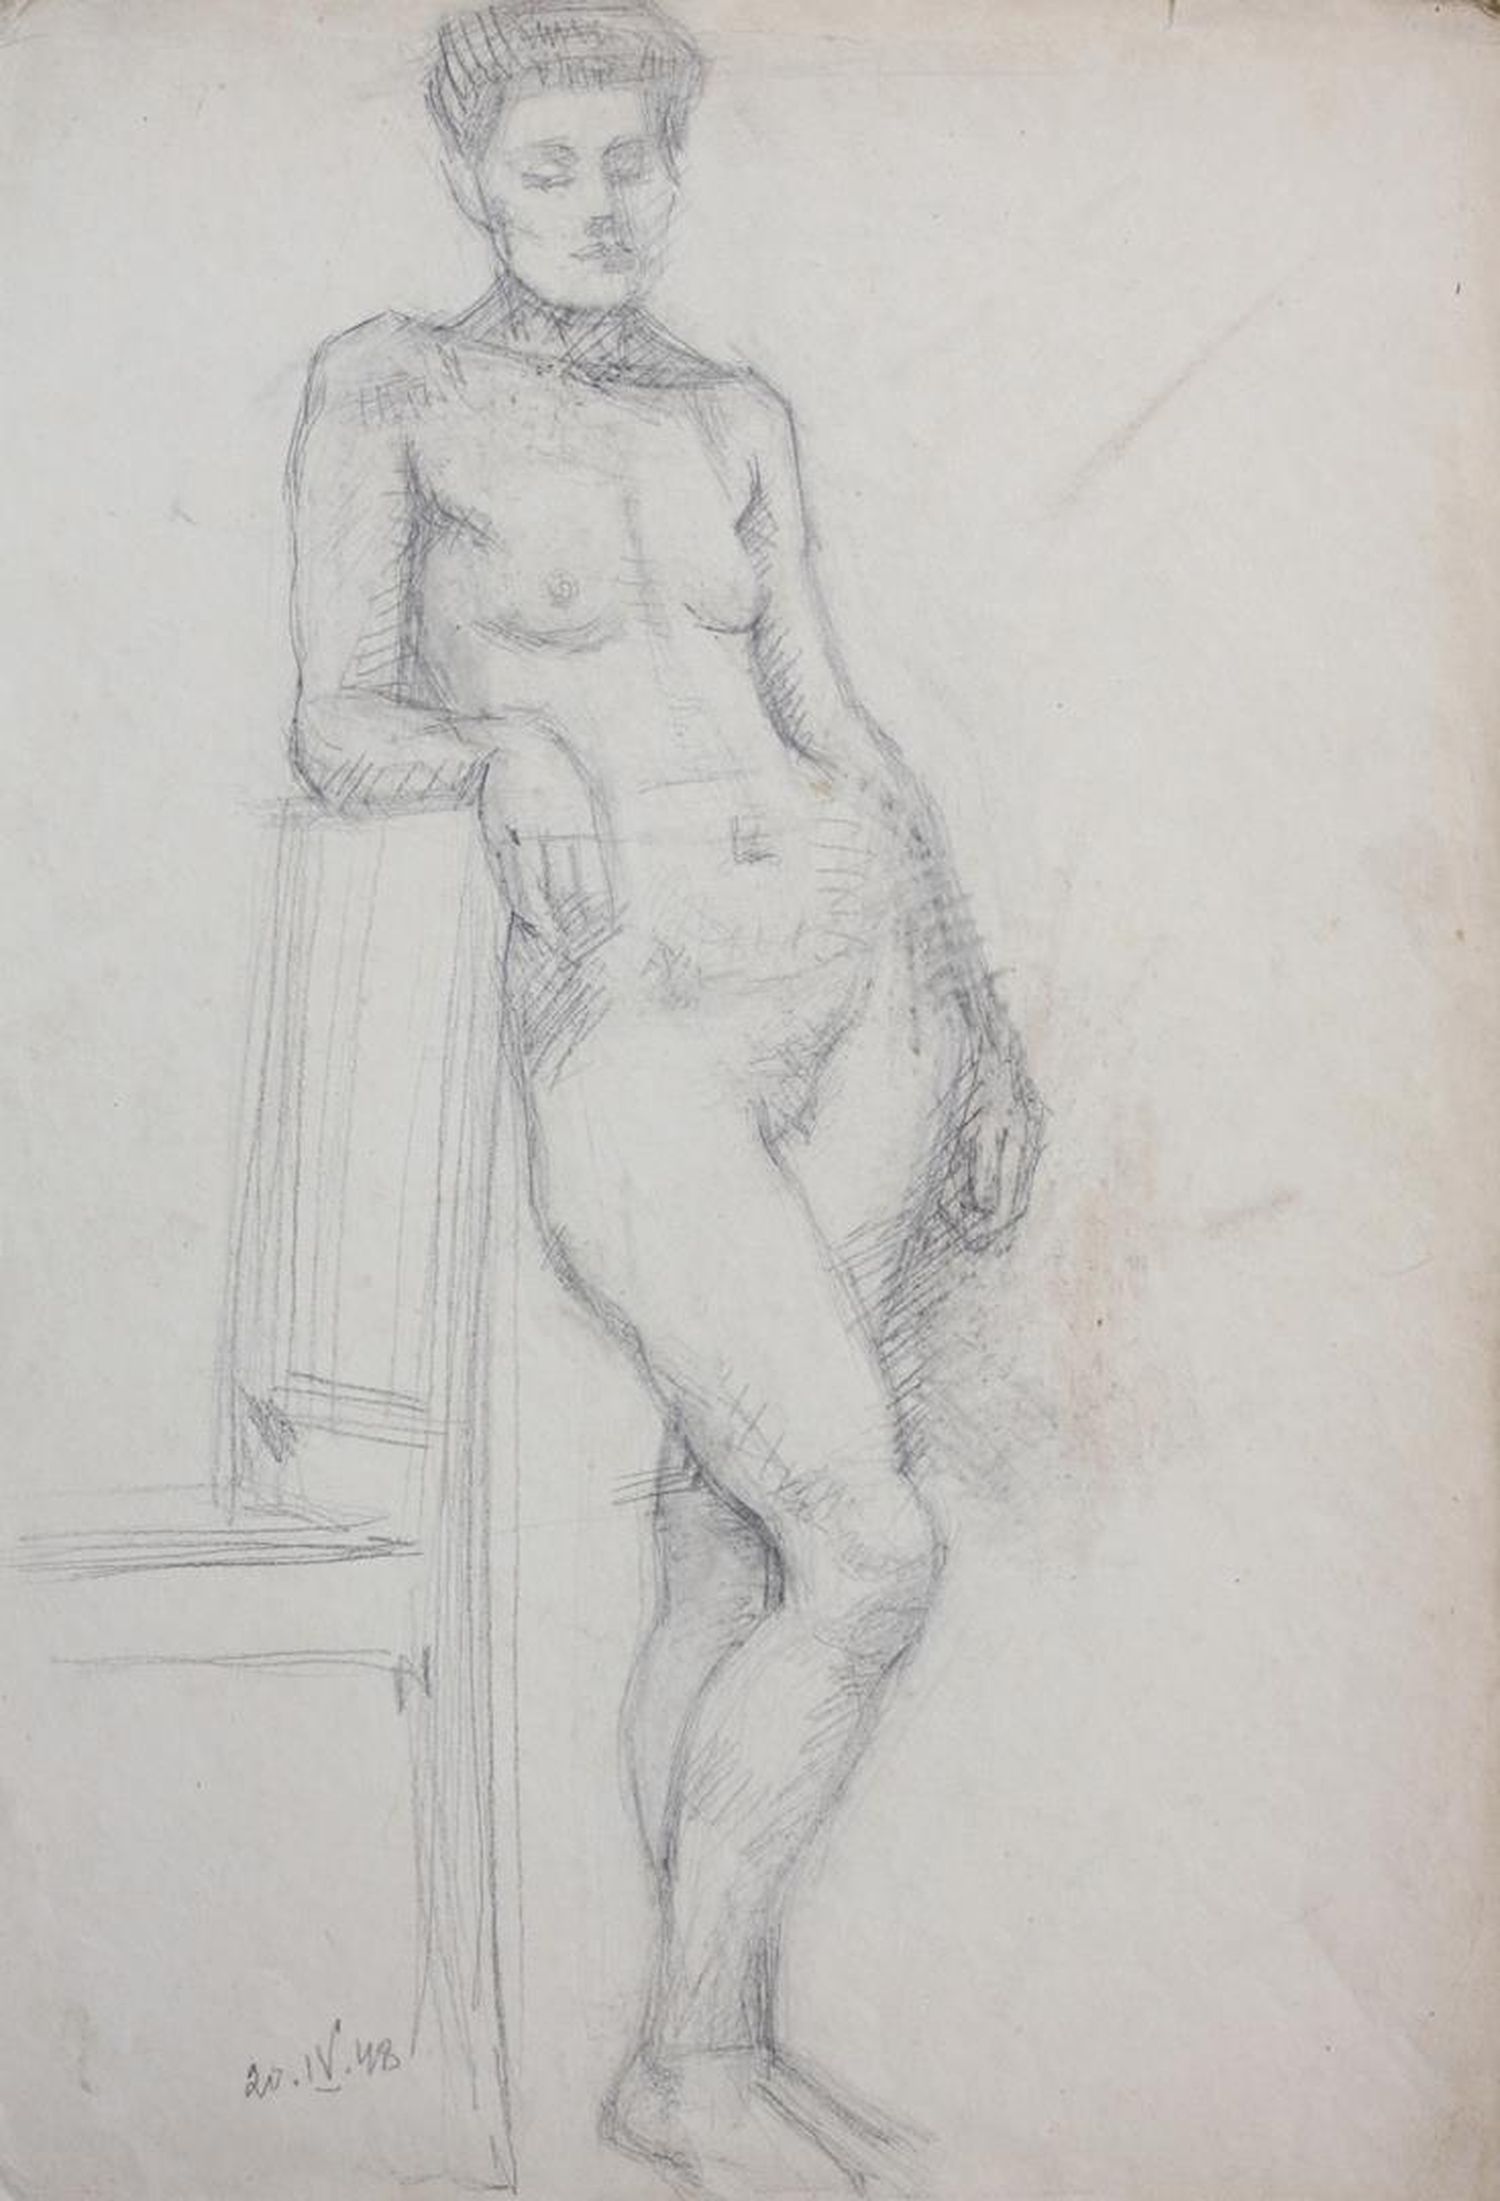 "Nude woman leaning on chair"